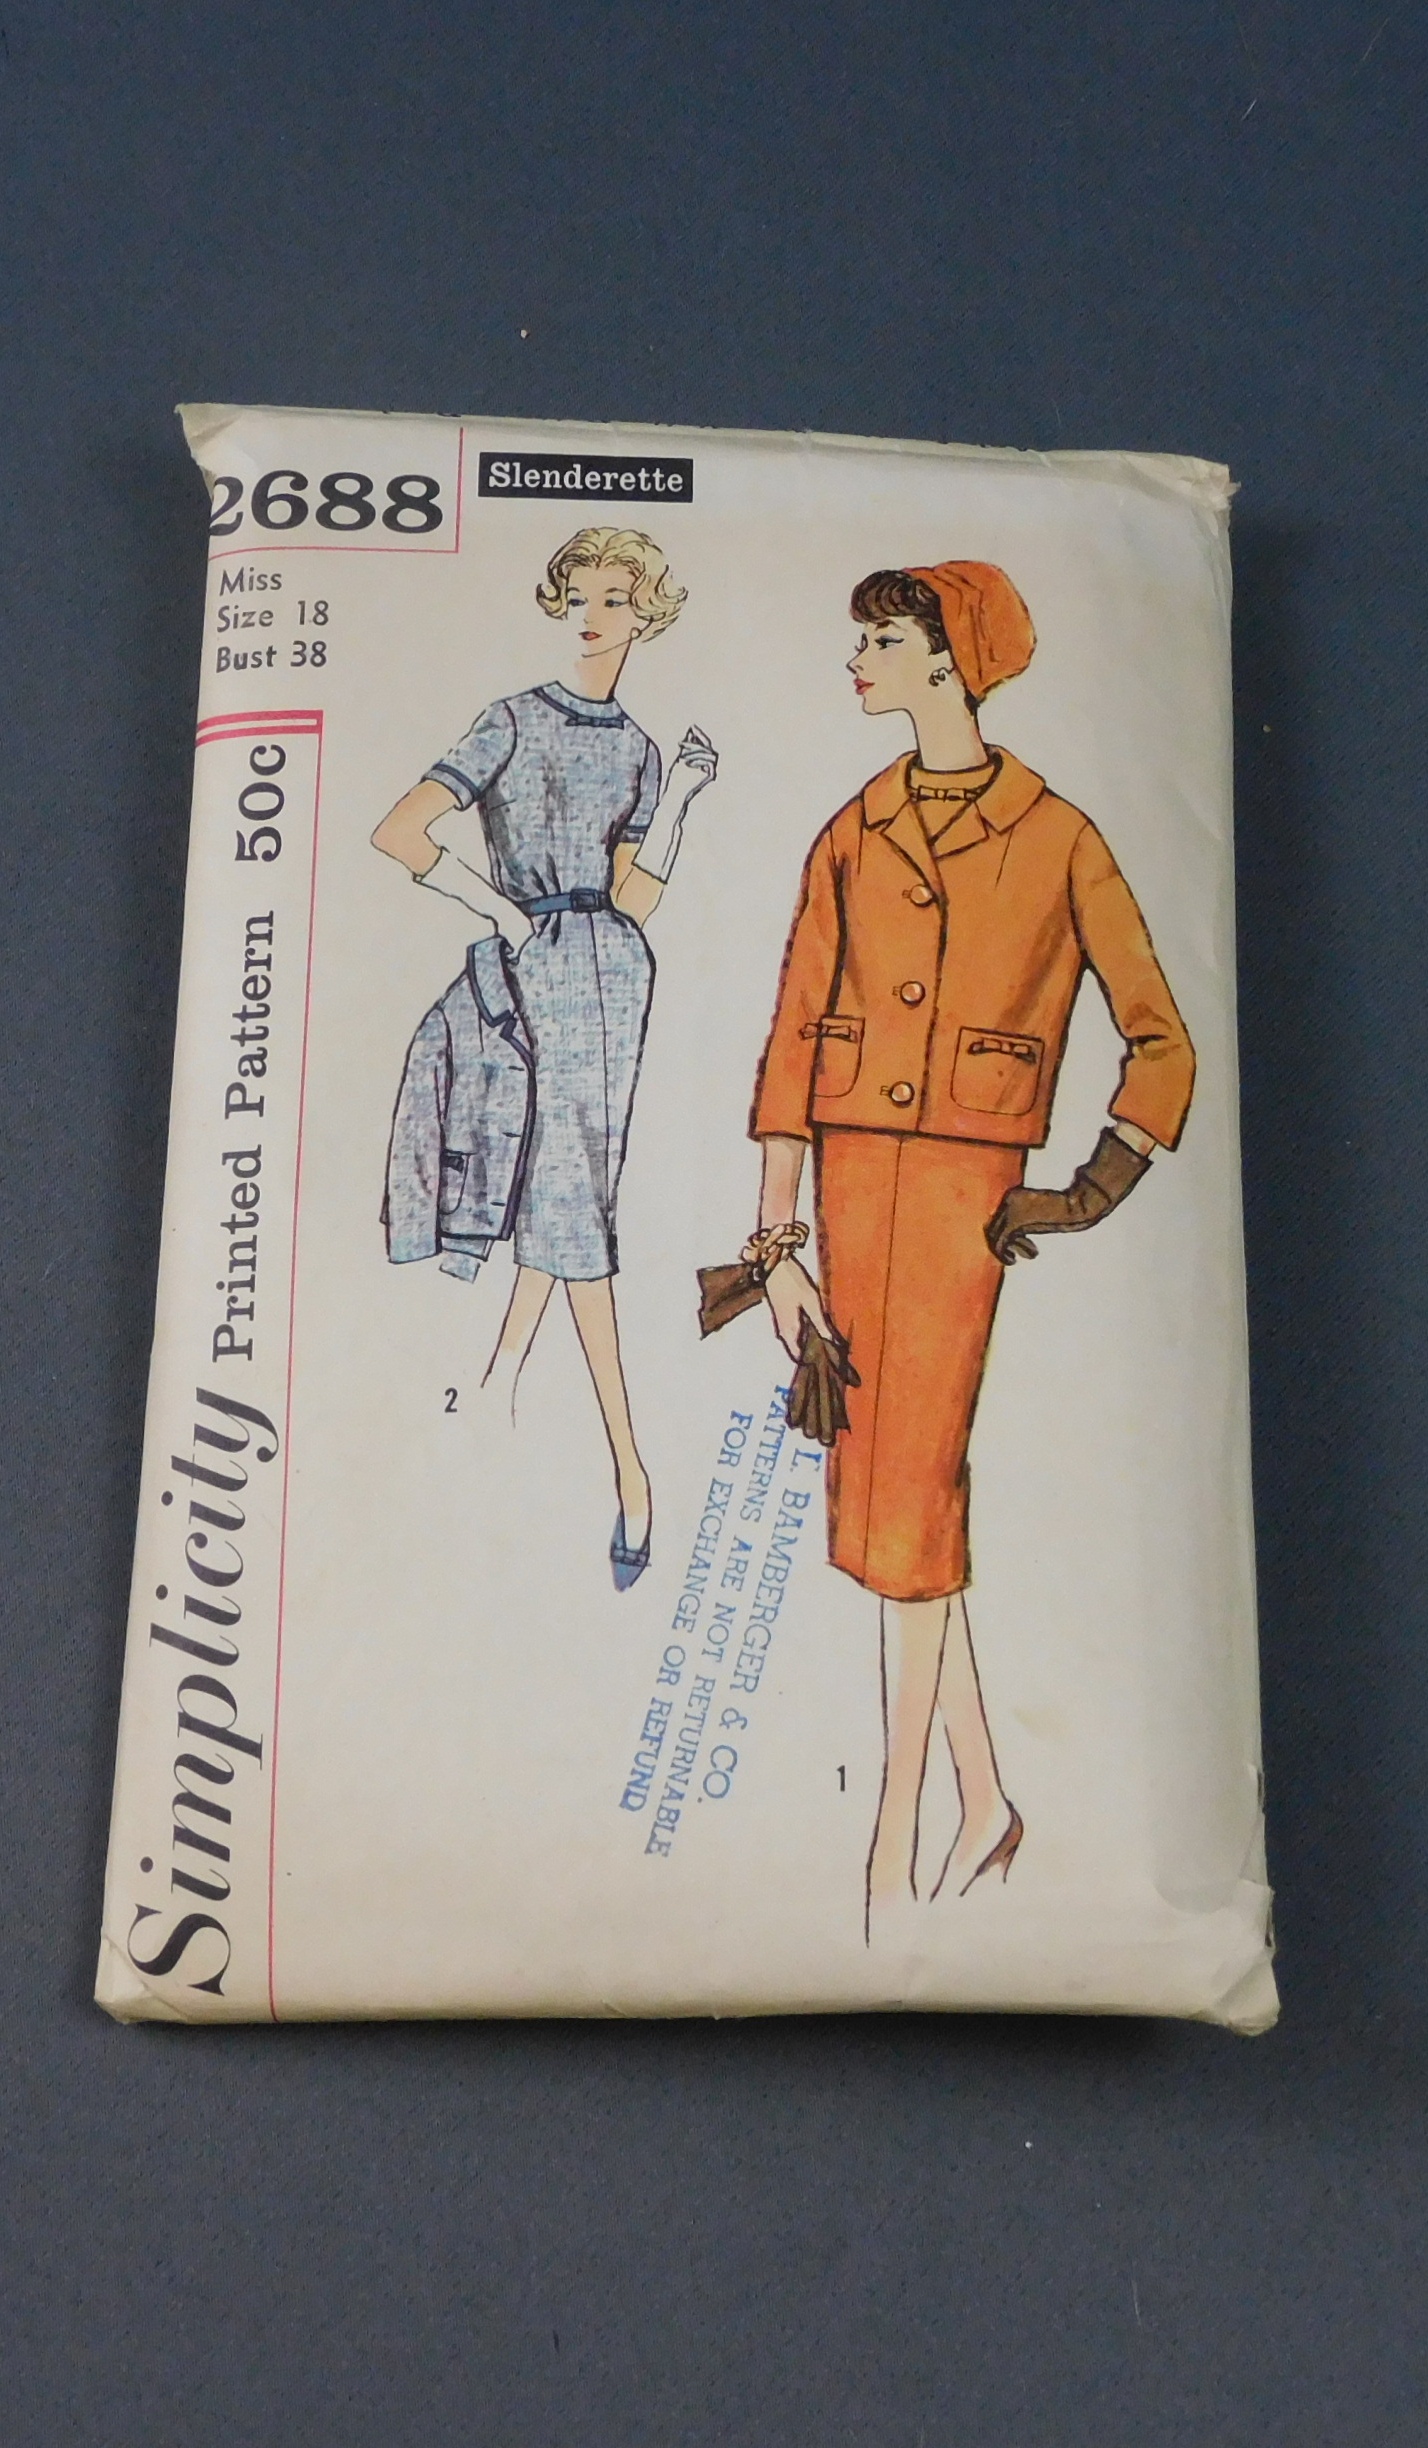 Vintage 1950s Sheath Dress and Jacket Pattern, Simplicity 2688, 38 Bust